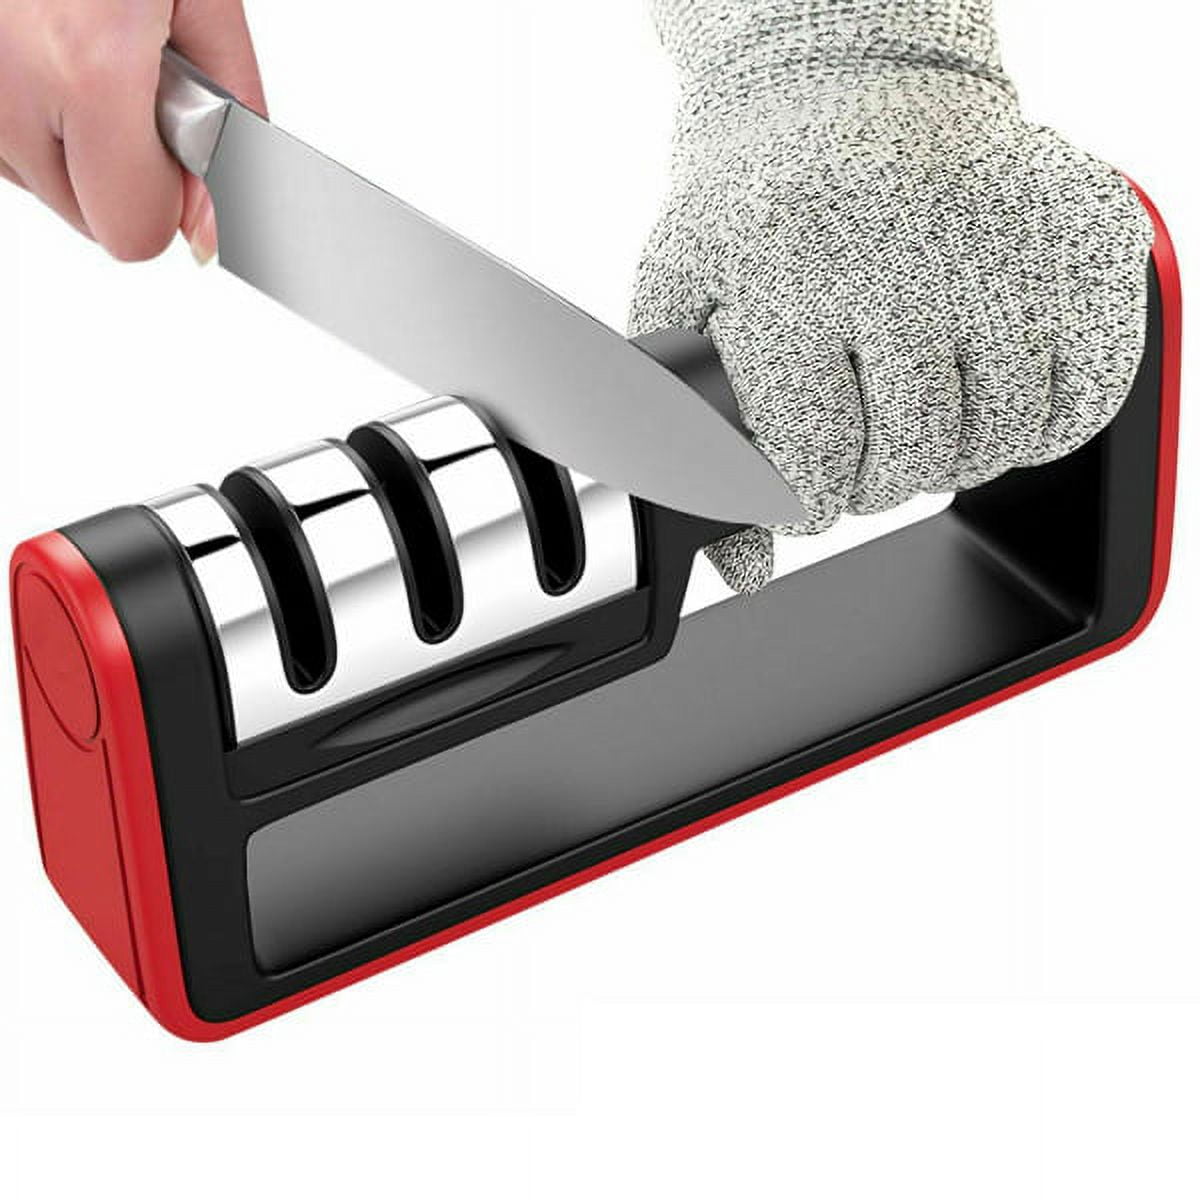 4 in 1 longzon 4 stage Knife Sharpener with a Pair of Cut